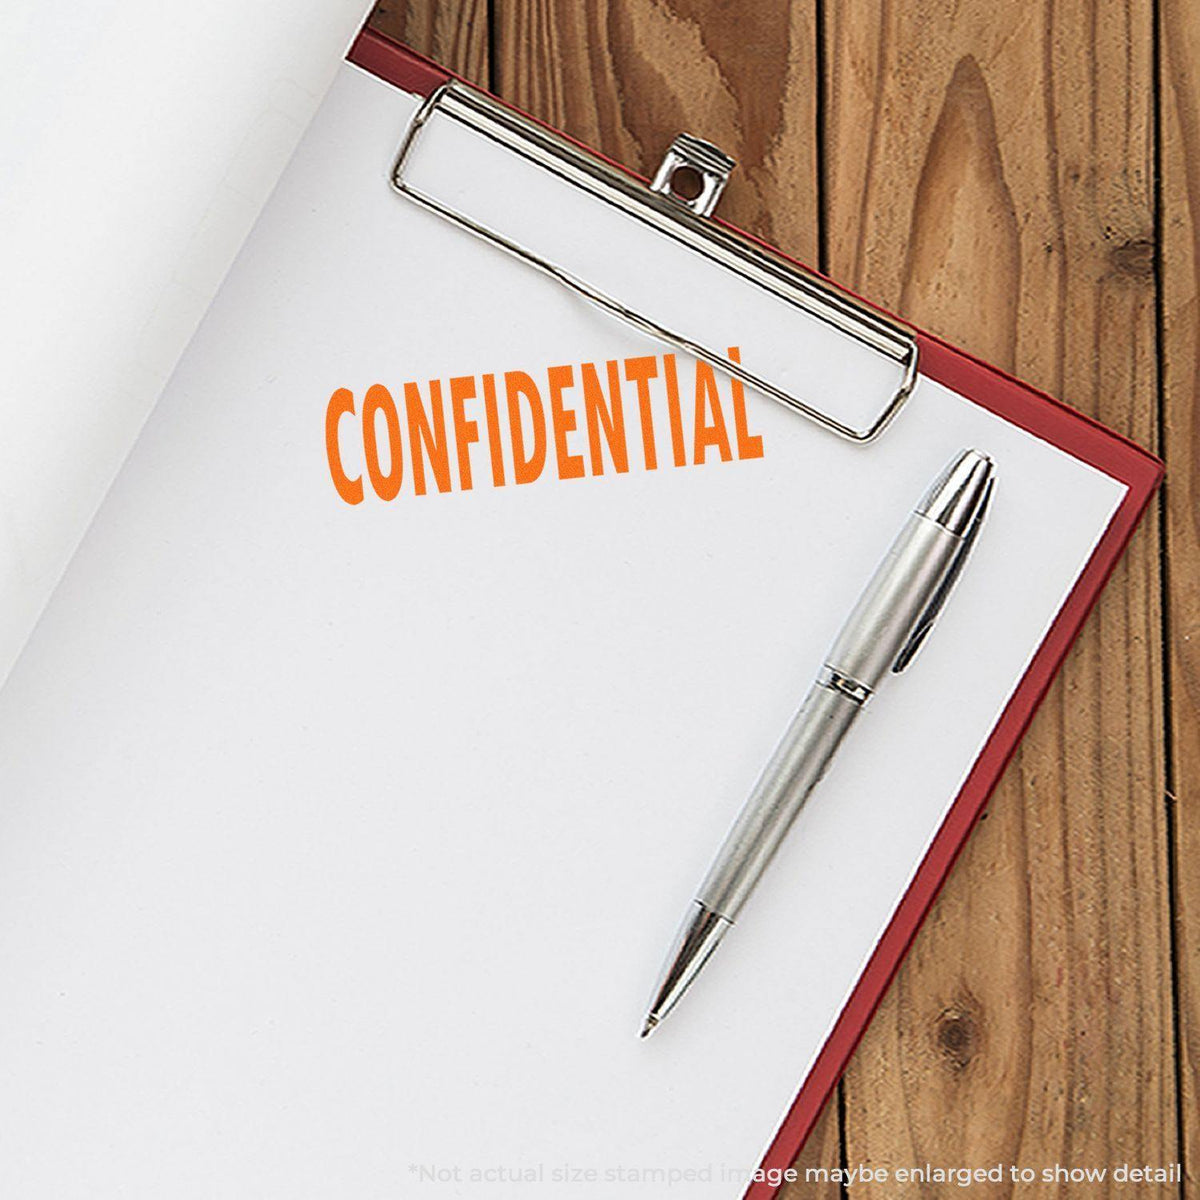 Large Confidential Rubber Stamp Lifestyle Photo